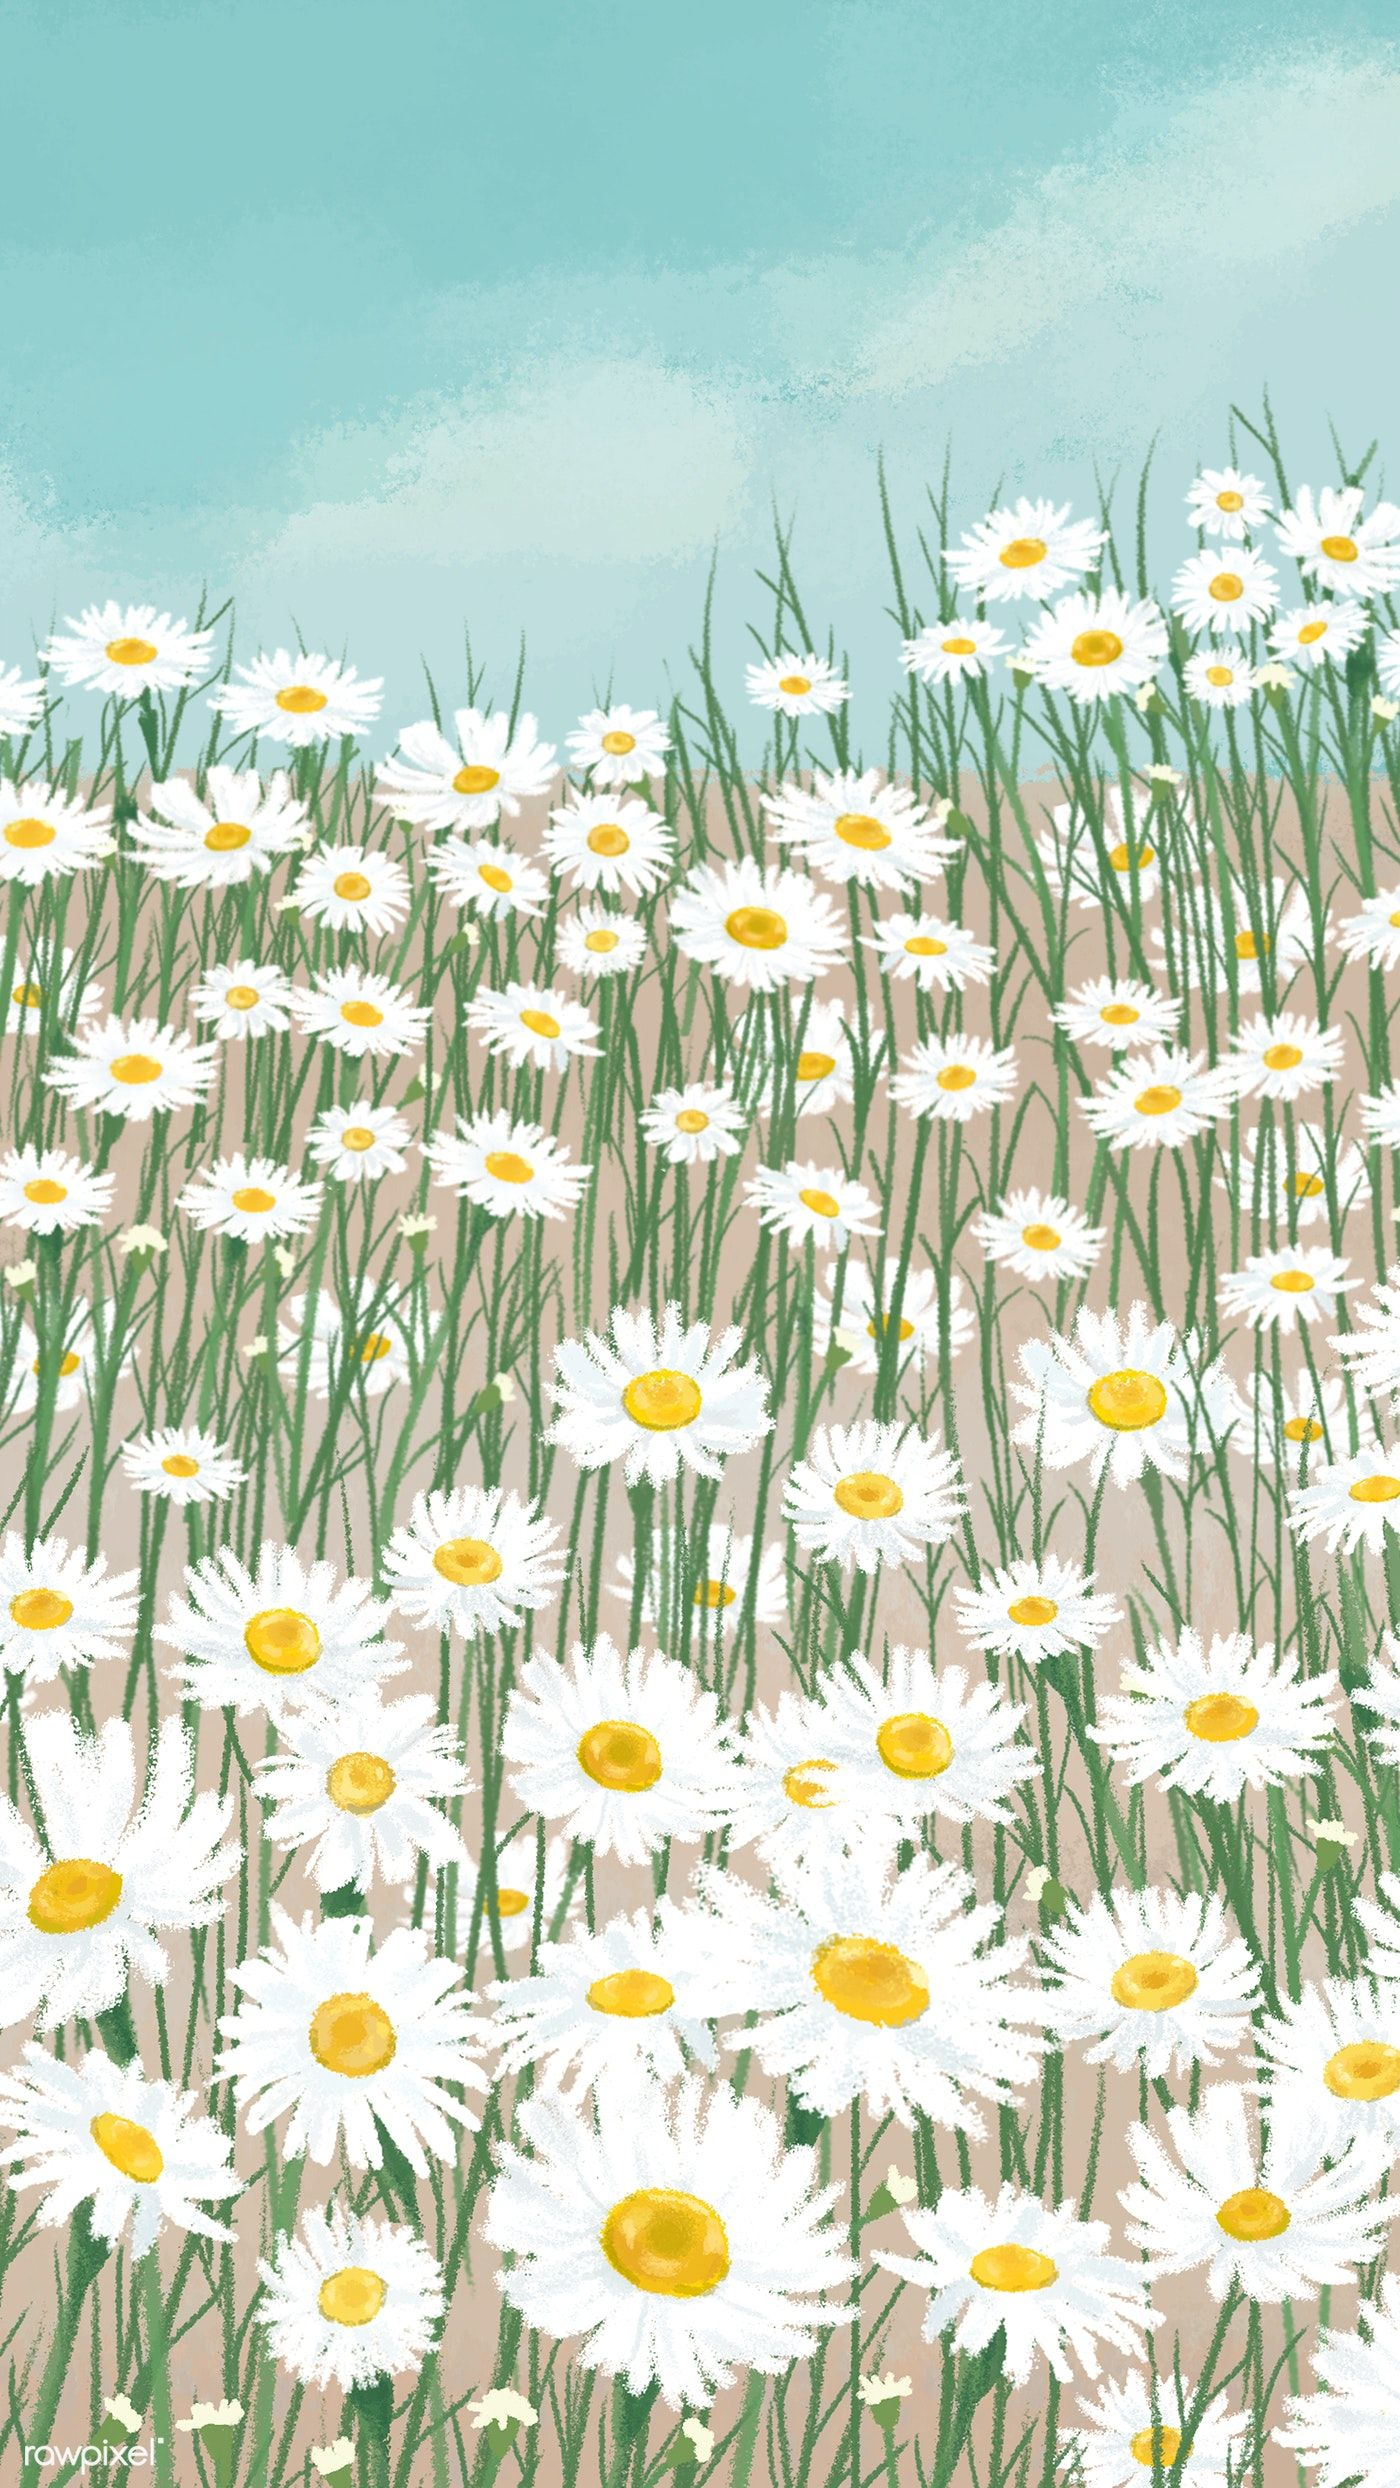 A field of daisies with blue sky in the background - Daisy